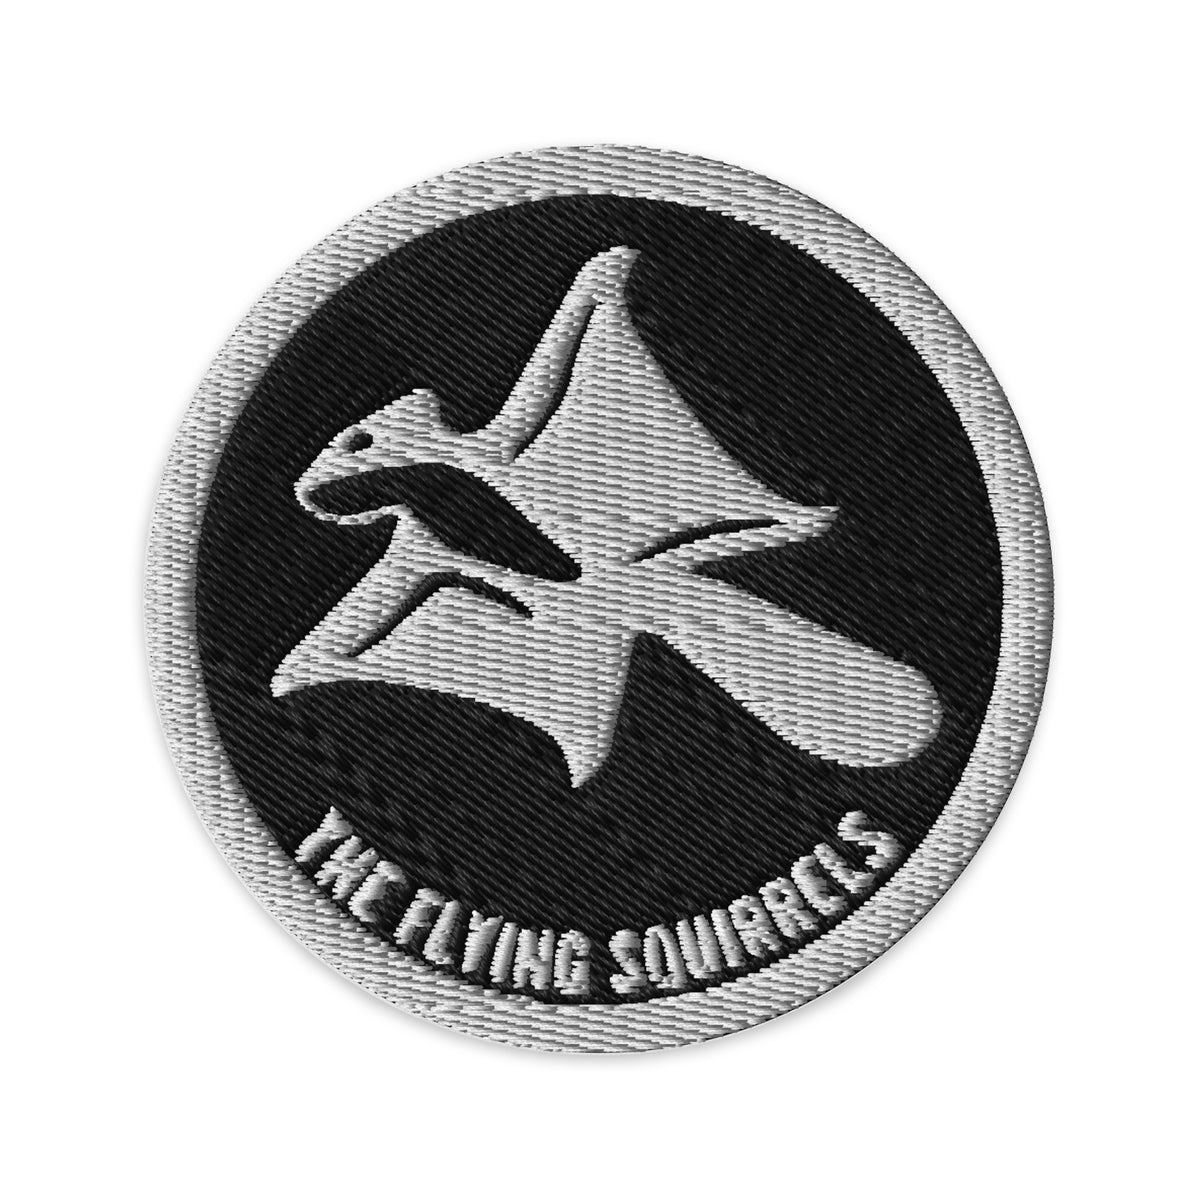 Flying Squirrels Patch